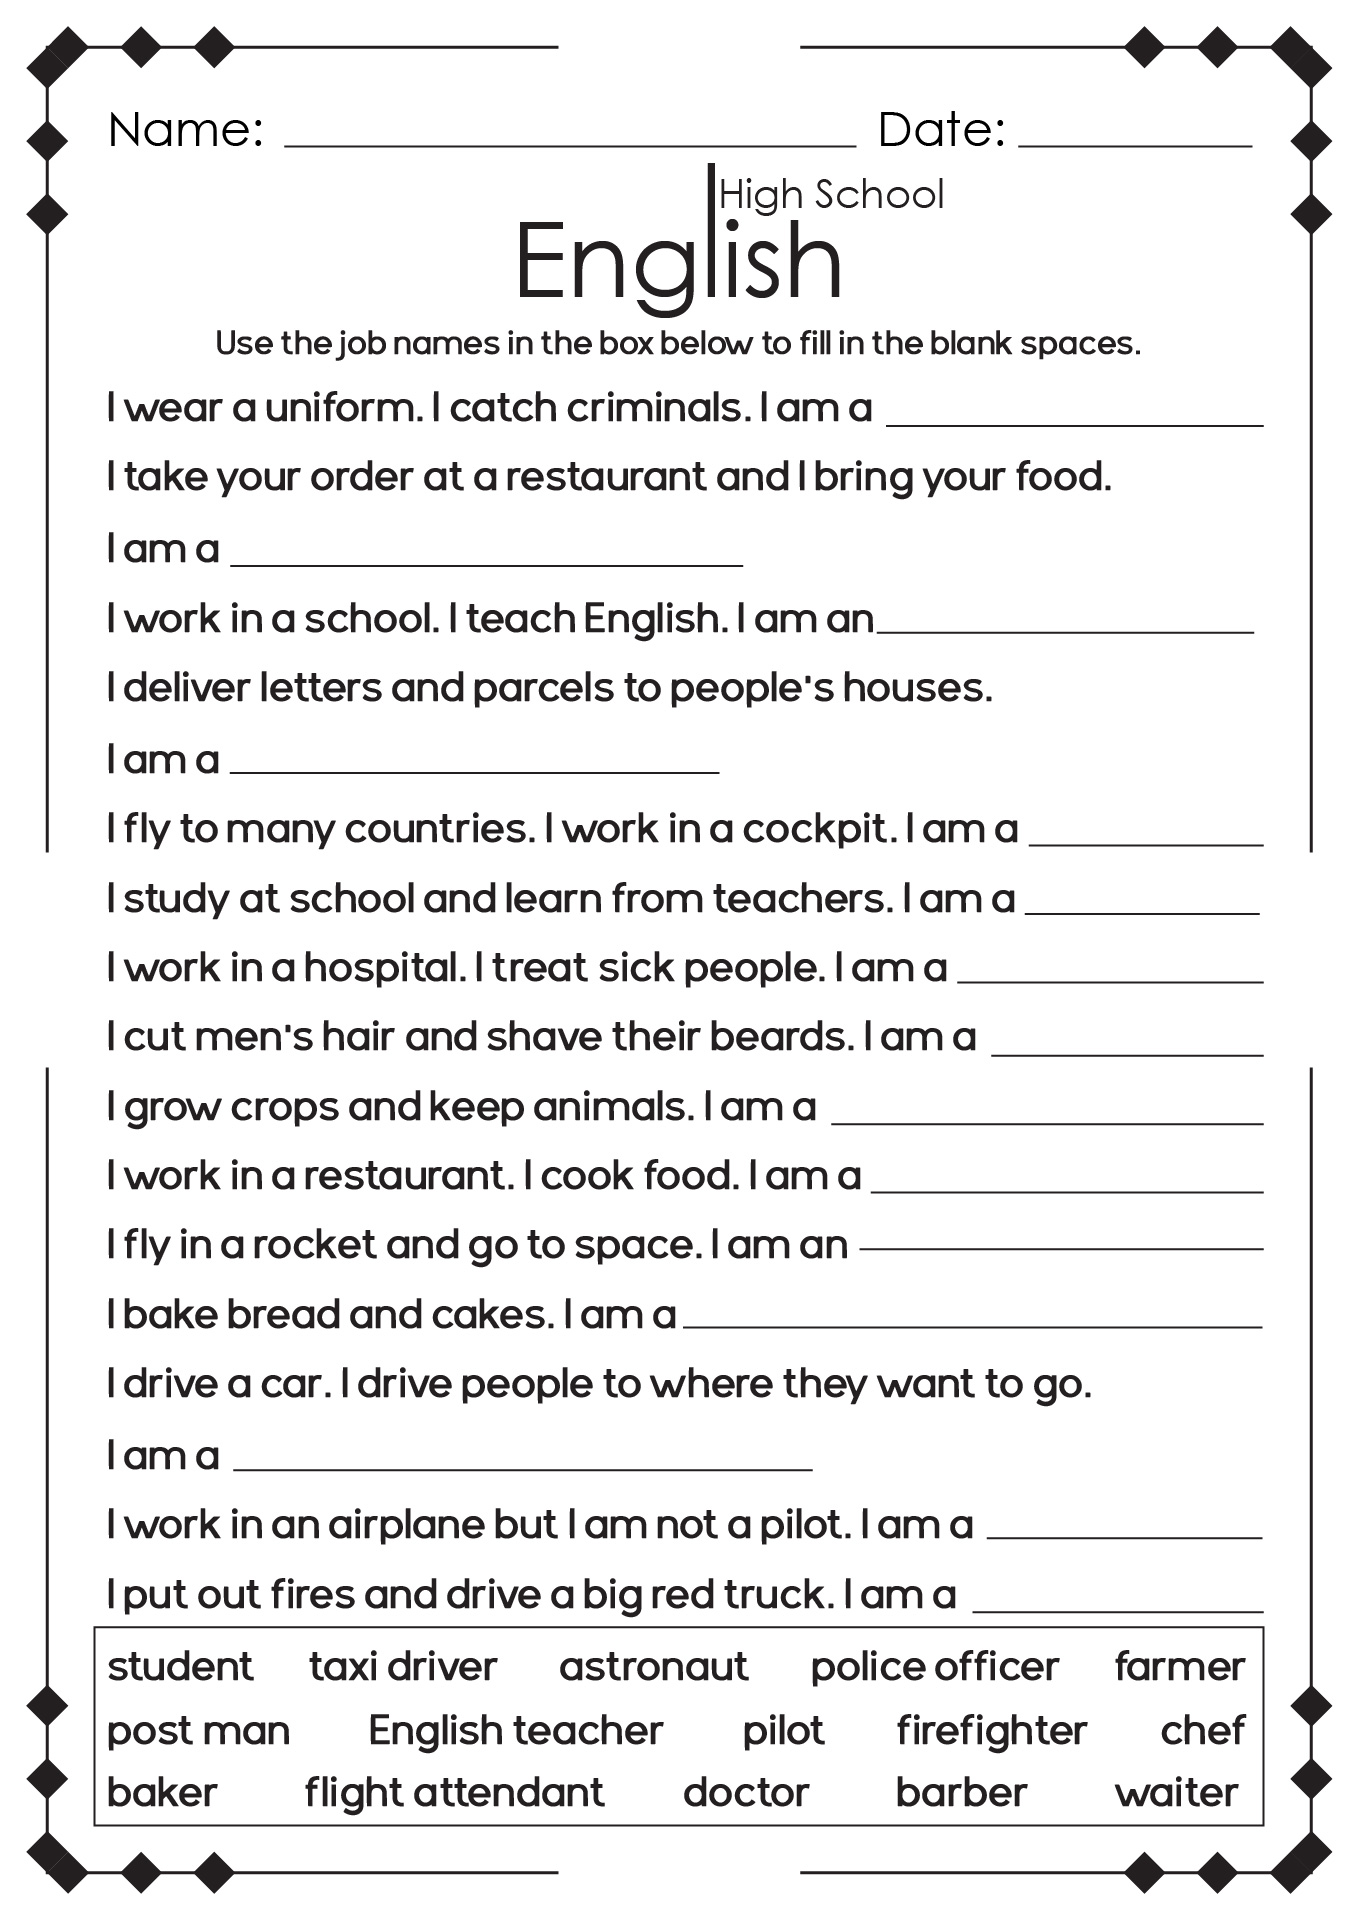 13 Best Images Of High School English Language Arts Worksheets High School English Worksheets